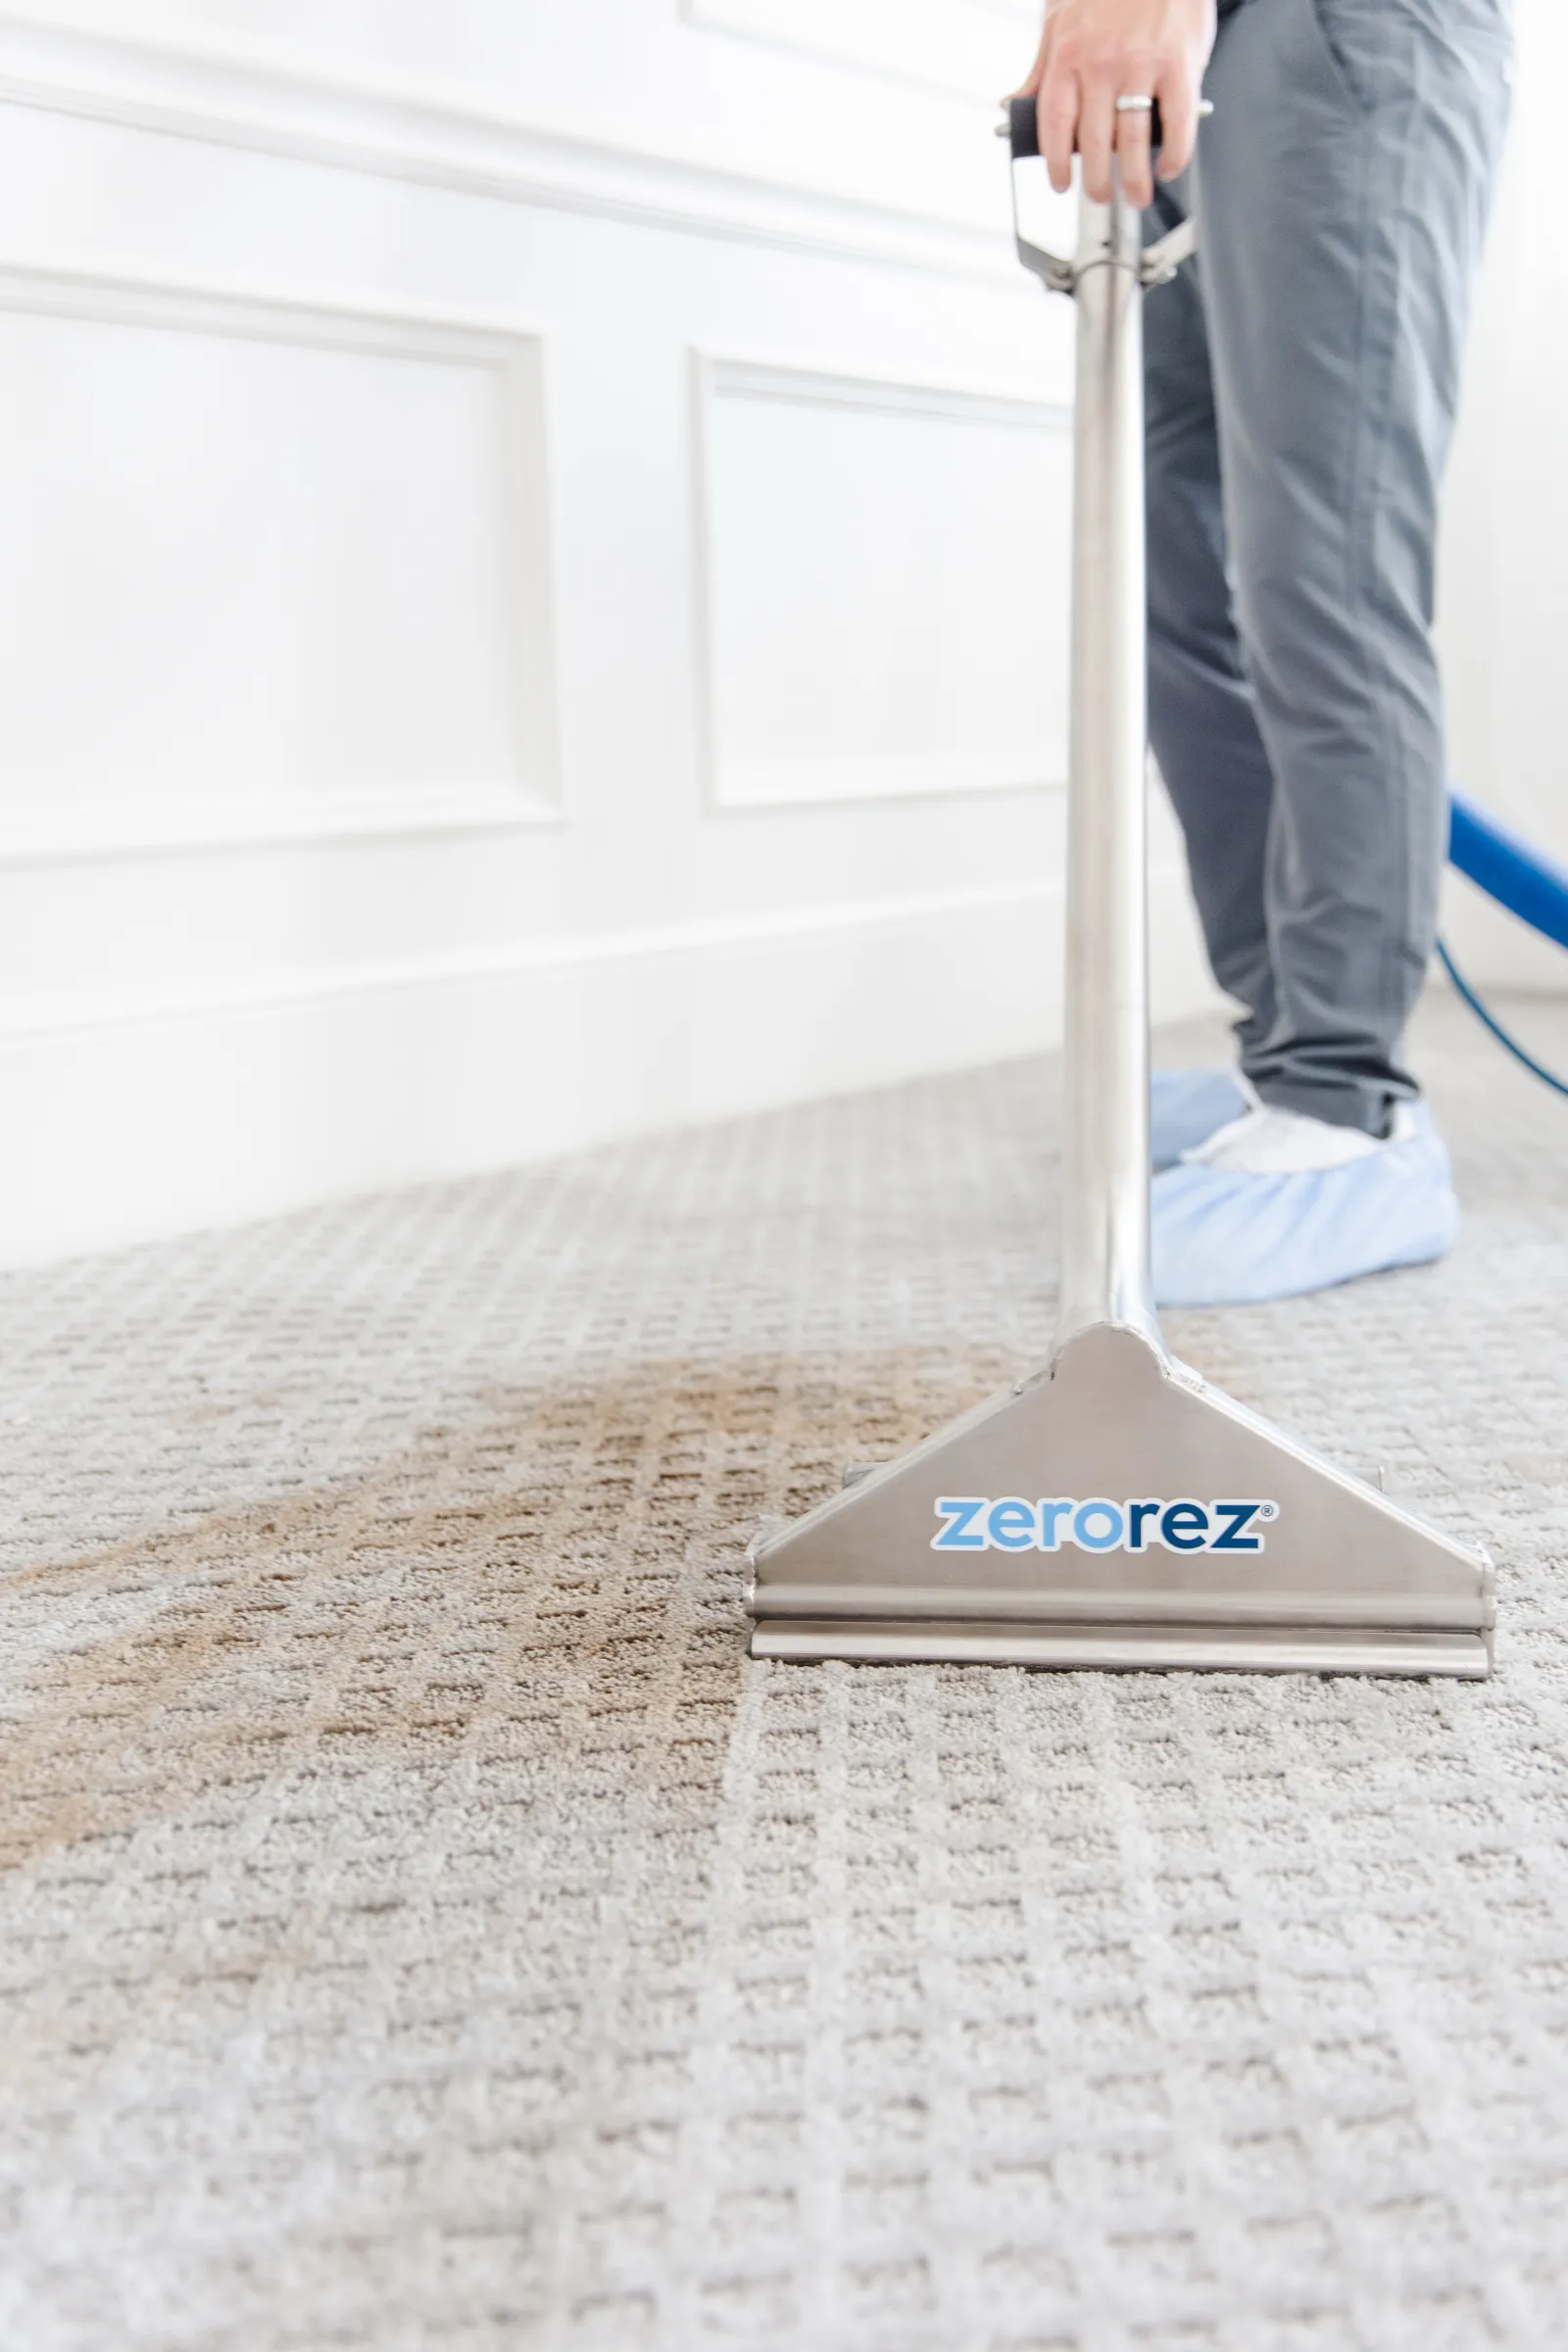 Zerorez helps prevent carpet wicking stains with its proprietary Zr™ Wand which doesn't flood carpets